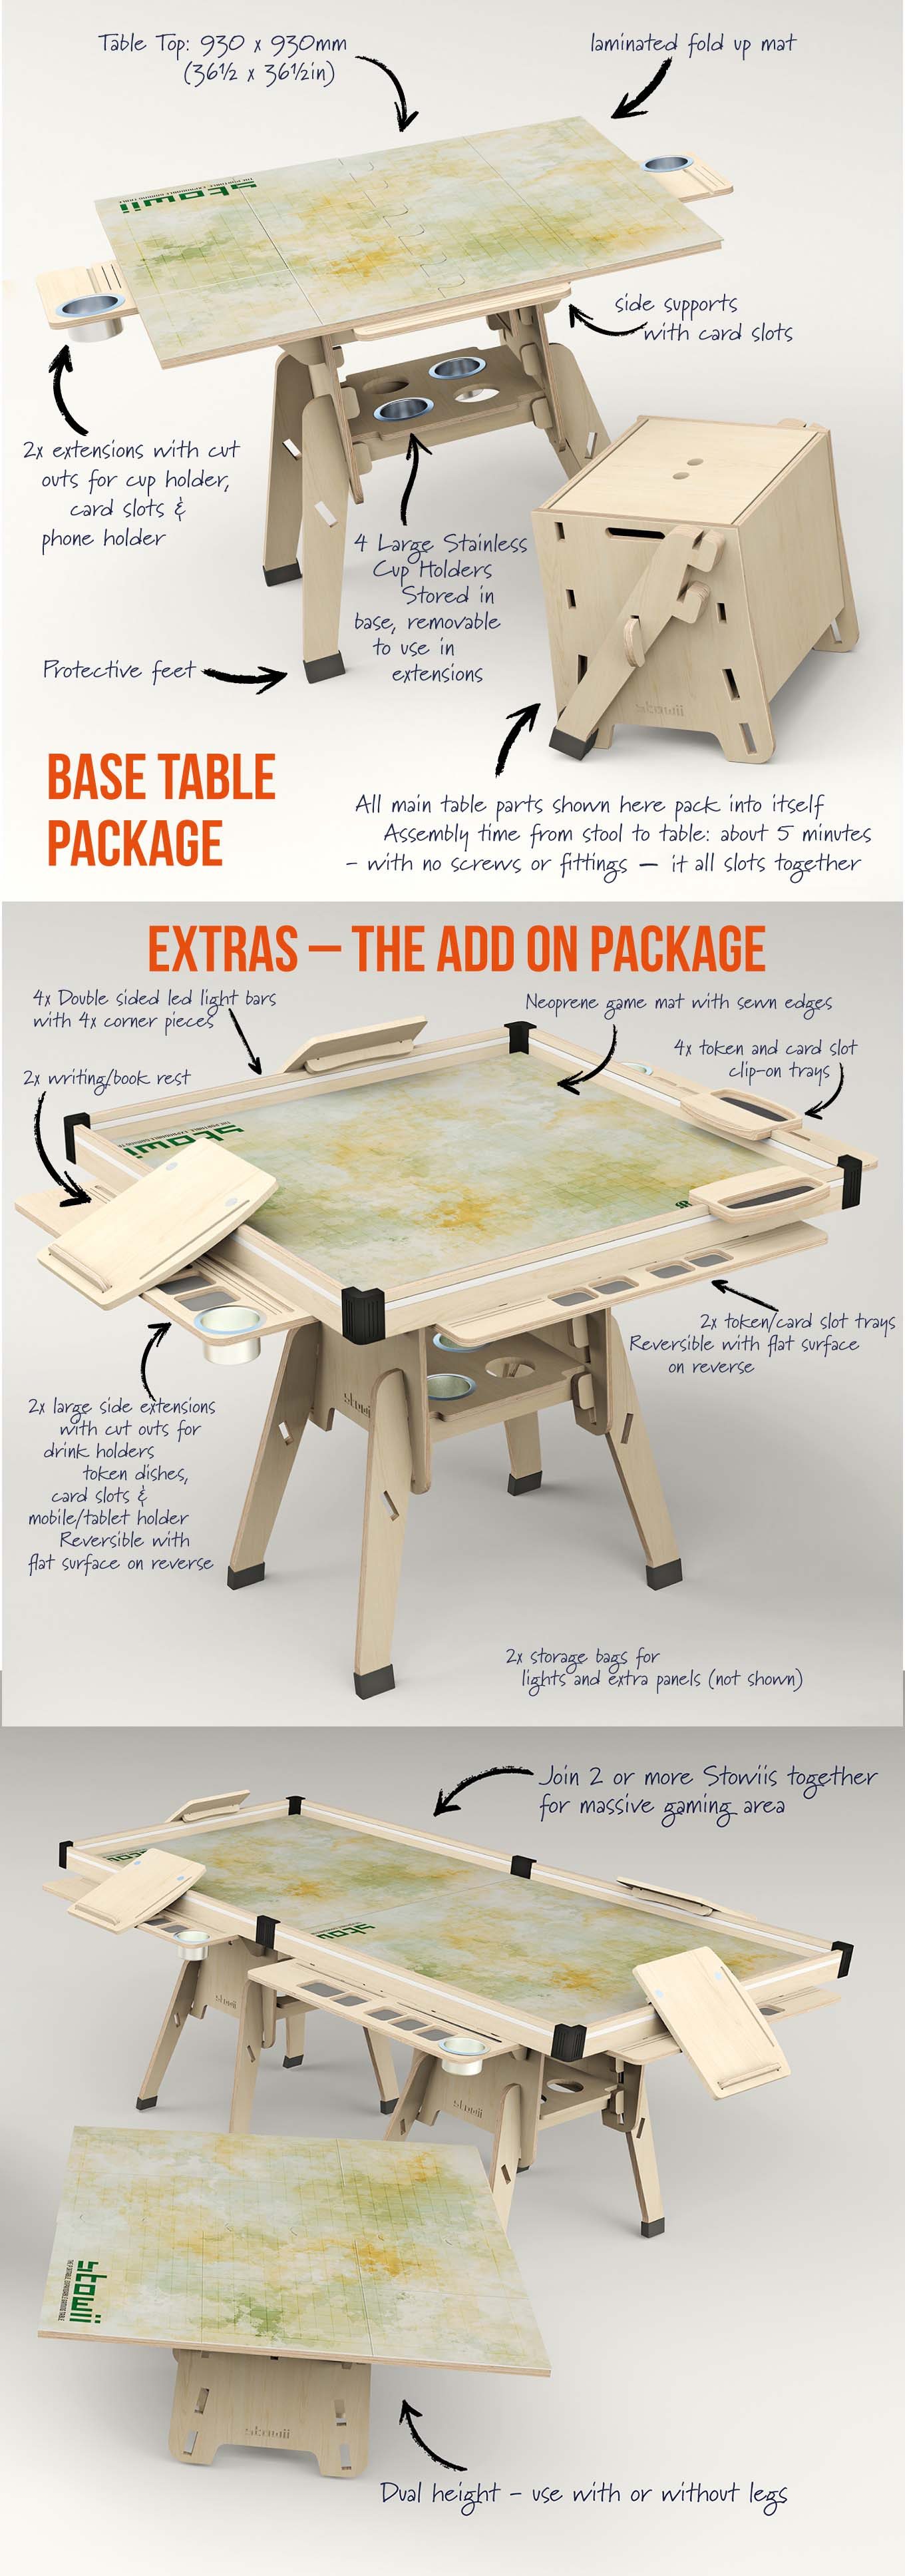 Stowii - The Portable, Adaptable, Foldaway Gaming Table That's